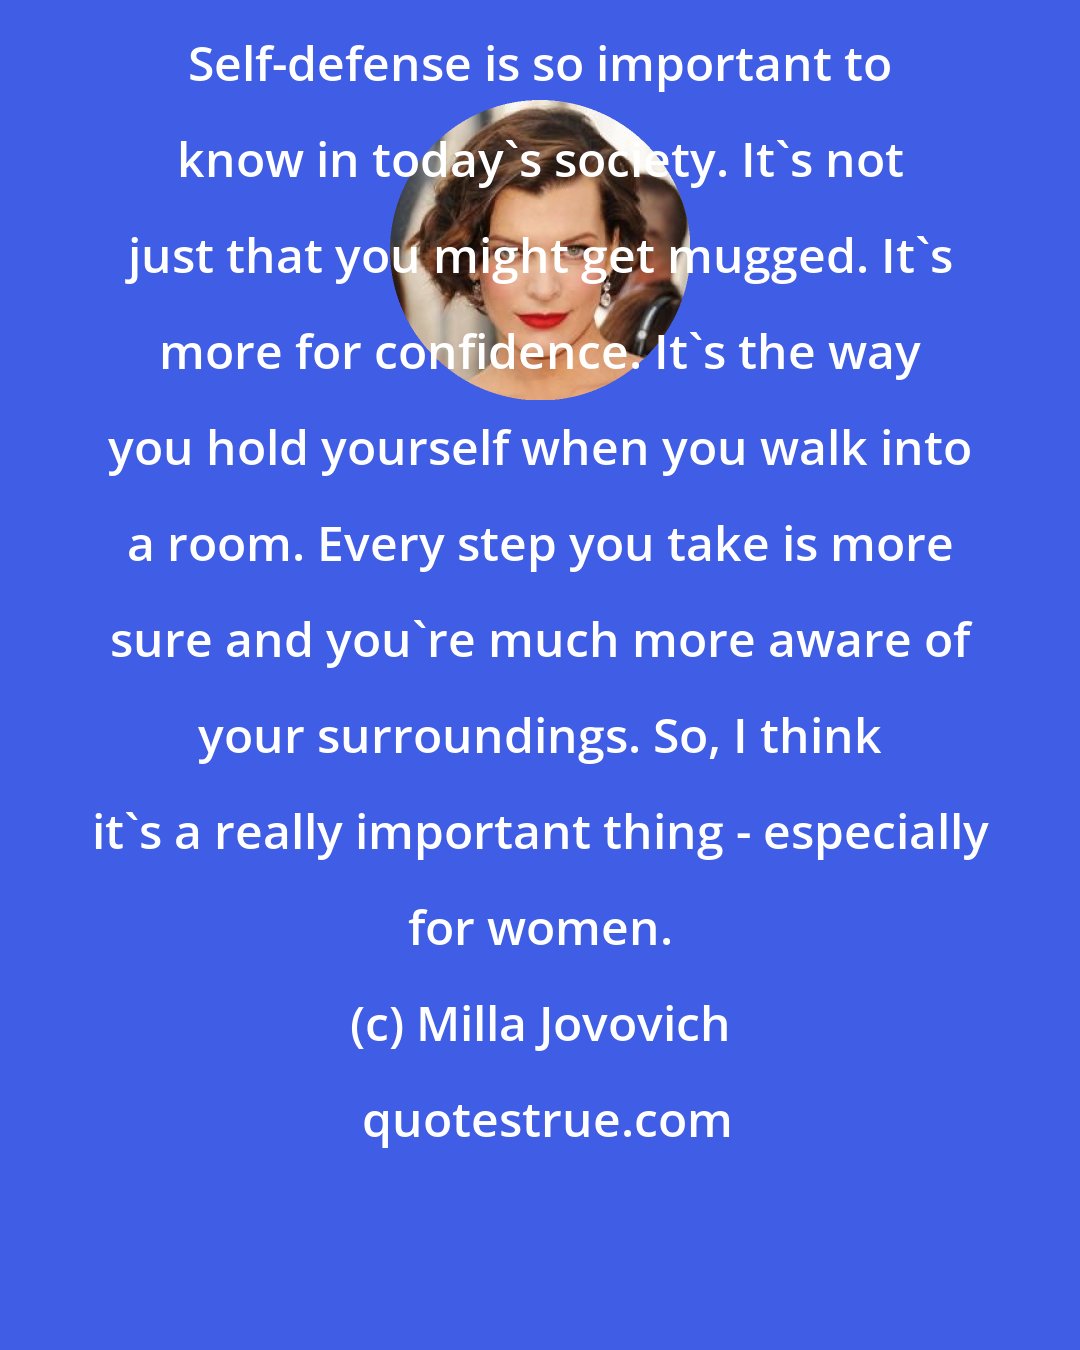 Milla Jovovich: Self-defense is so important to know in today's society. It's not just that you might get mugged. It's more for confidence. It's the way you hold yourself when you walk into a room. Every step you take is more sure and you're much more aware of your surroundings. So, I think it's a really important thing - especially for women.